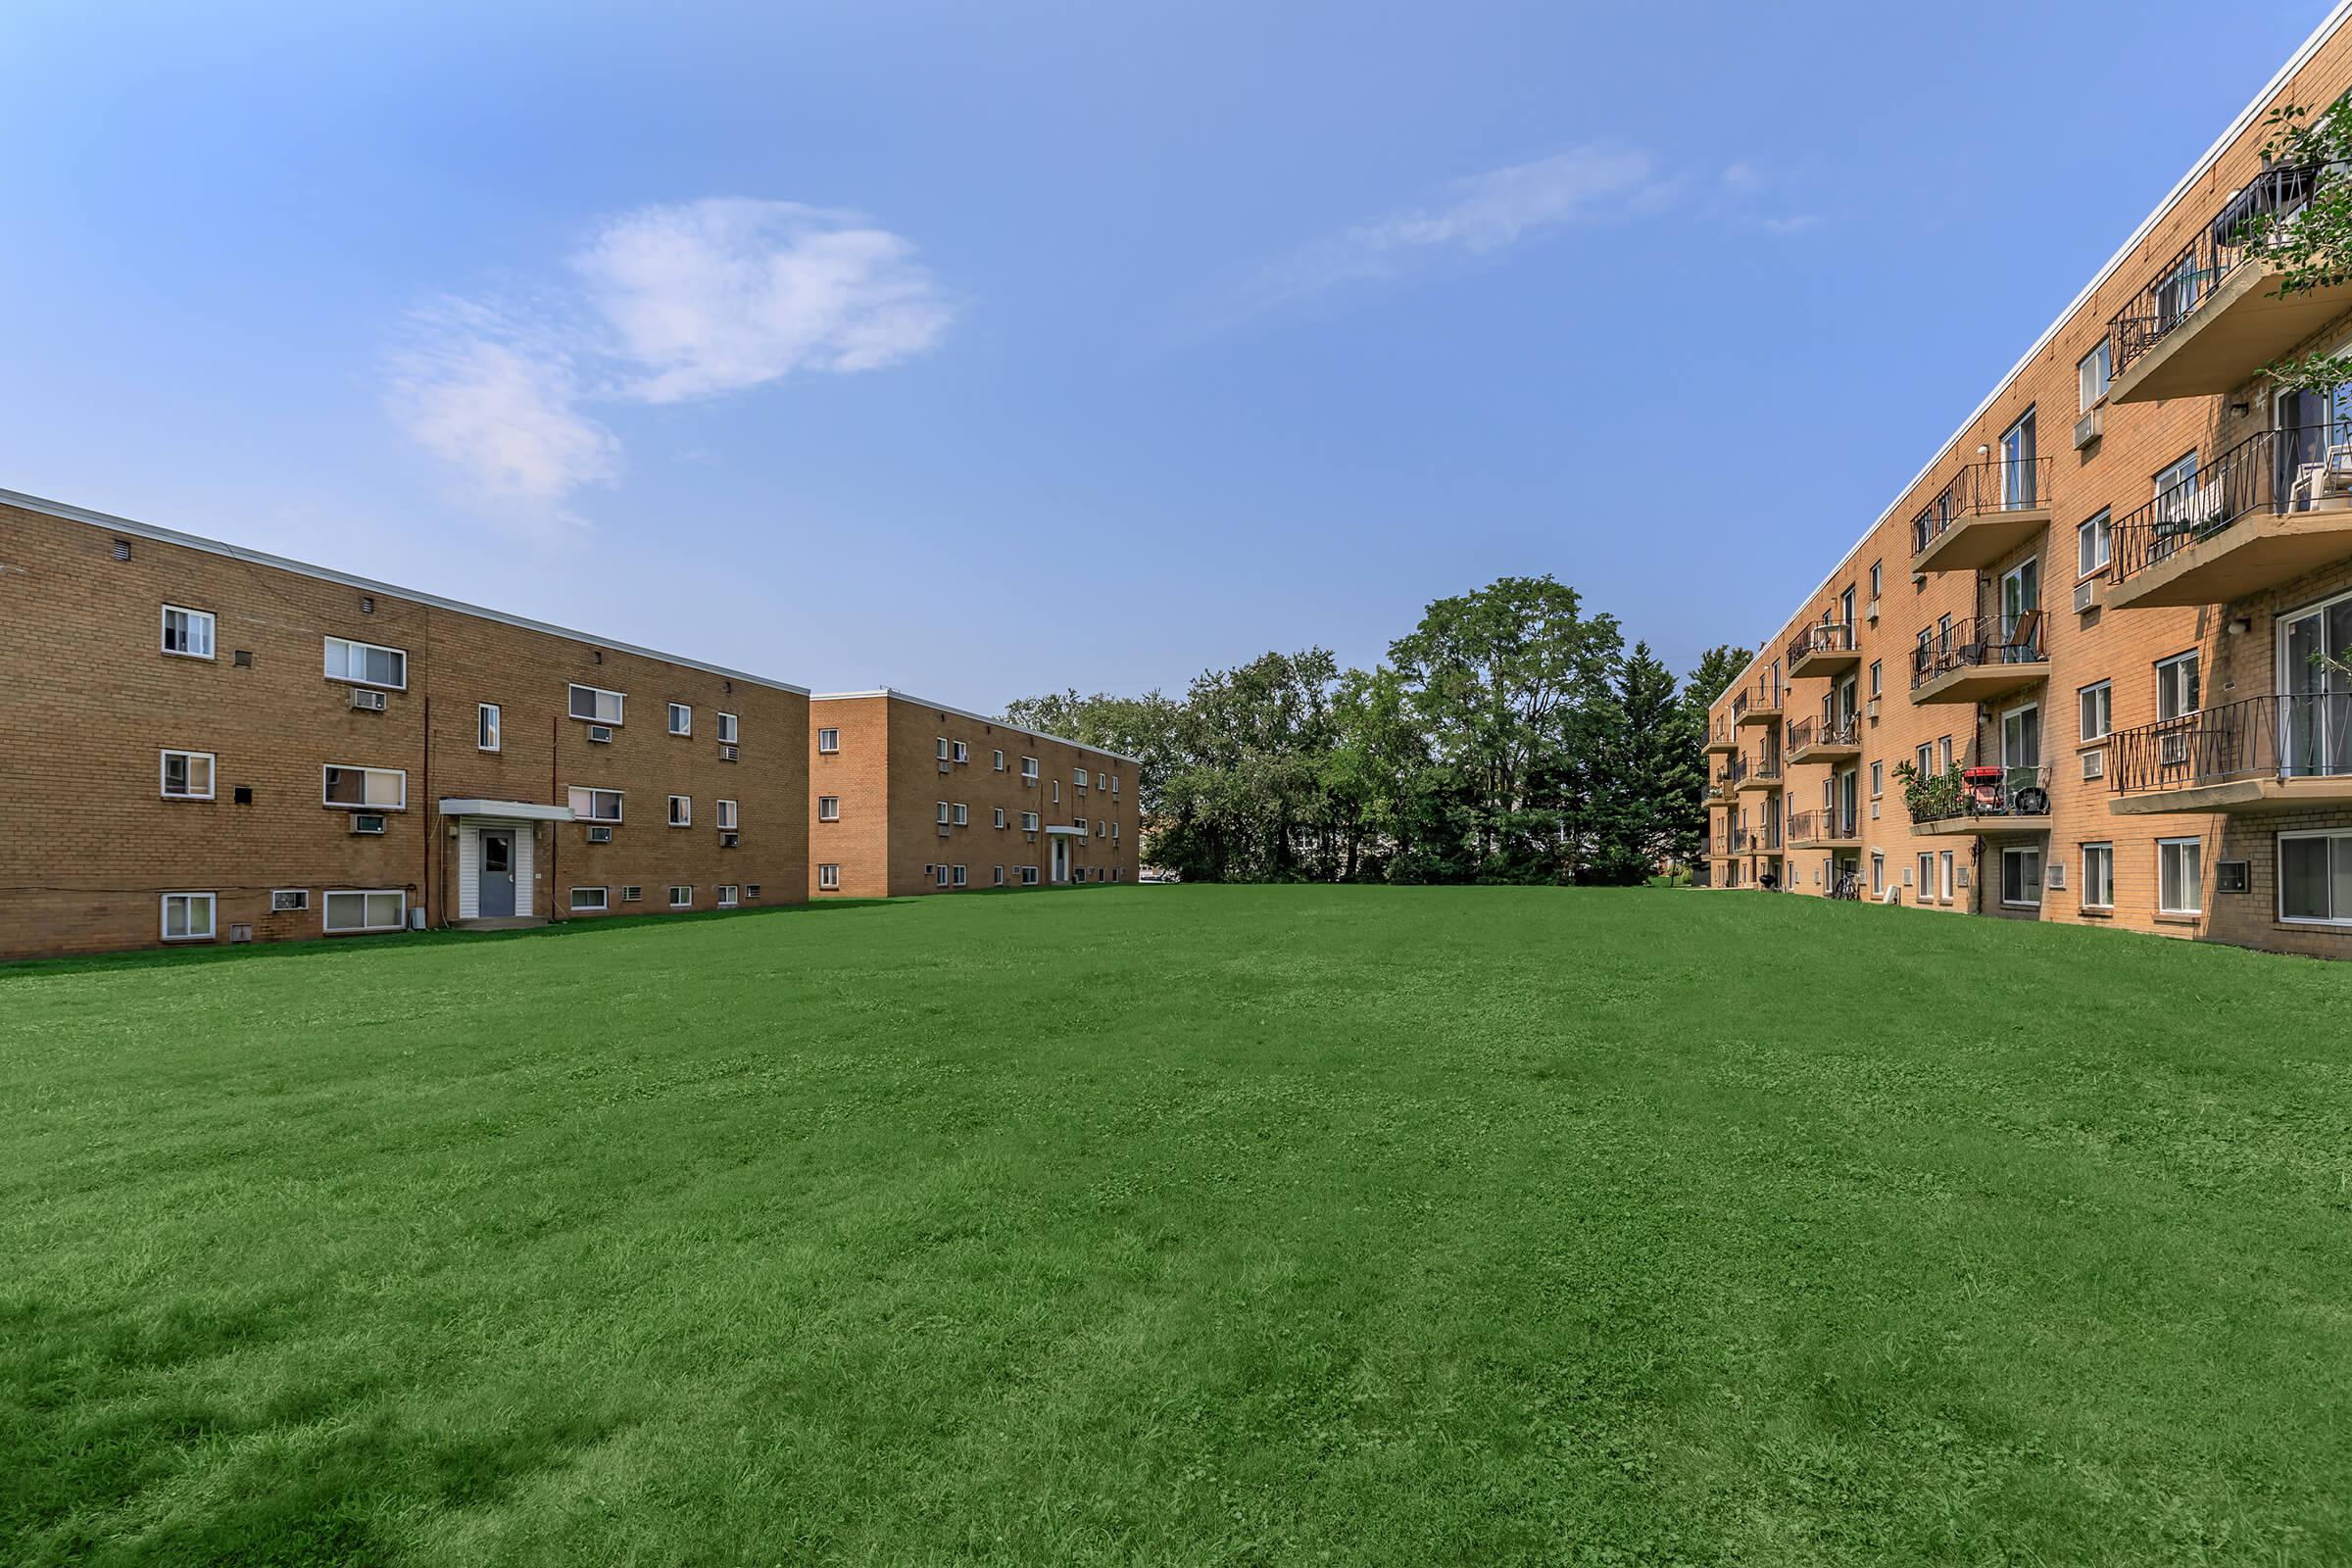 a large brick building with a grassy field